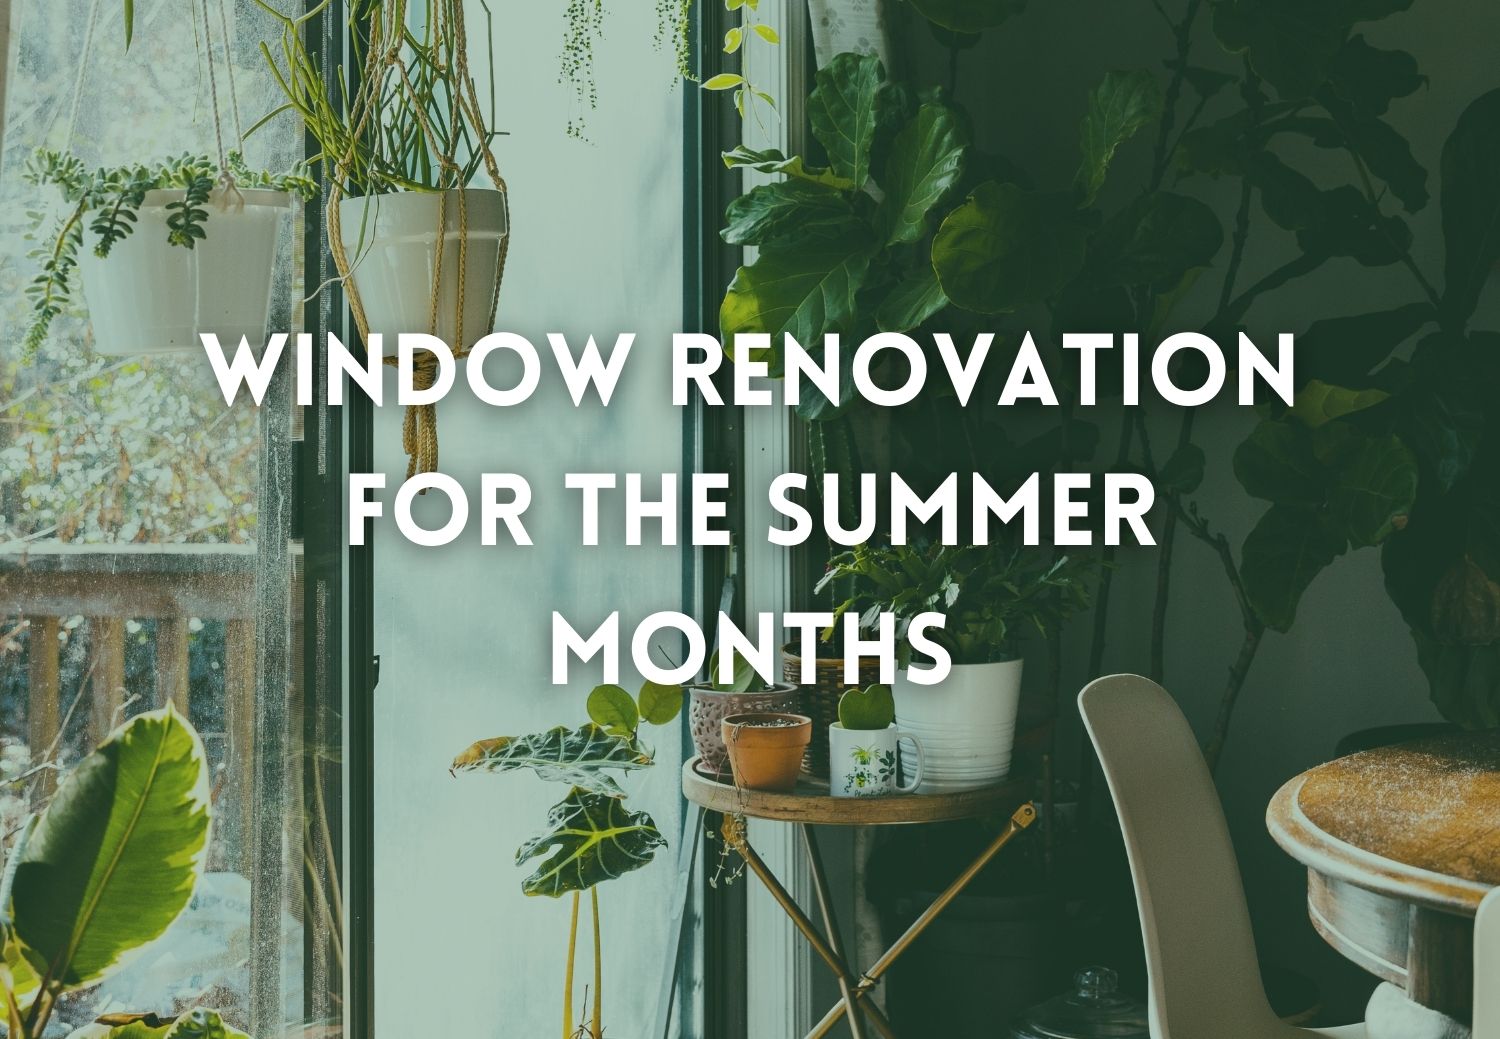 Window Renovation for the summer months